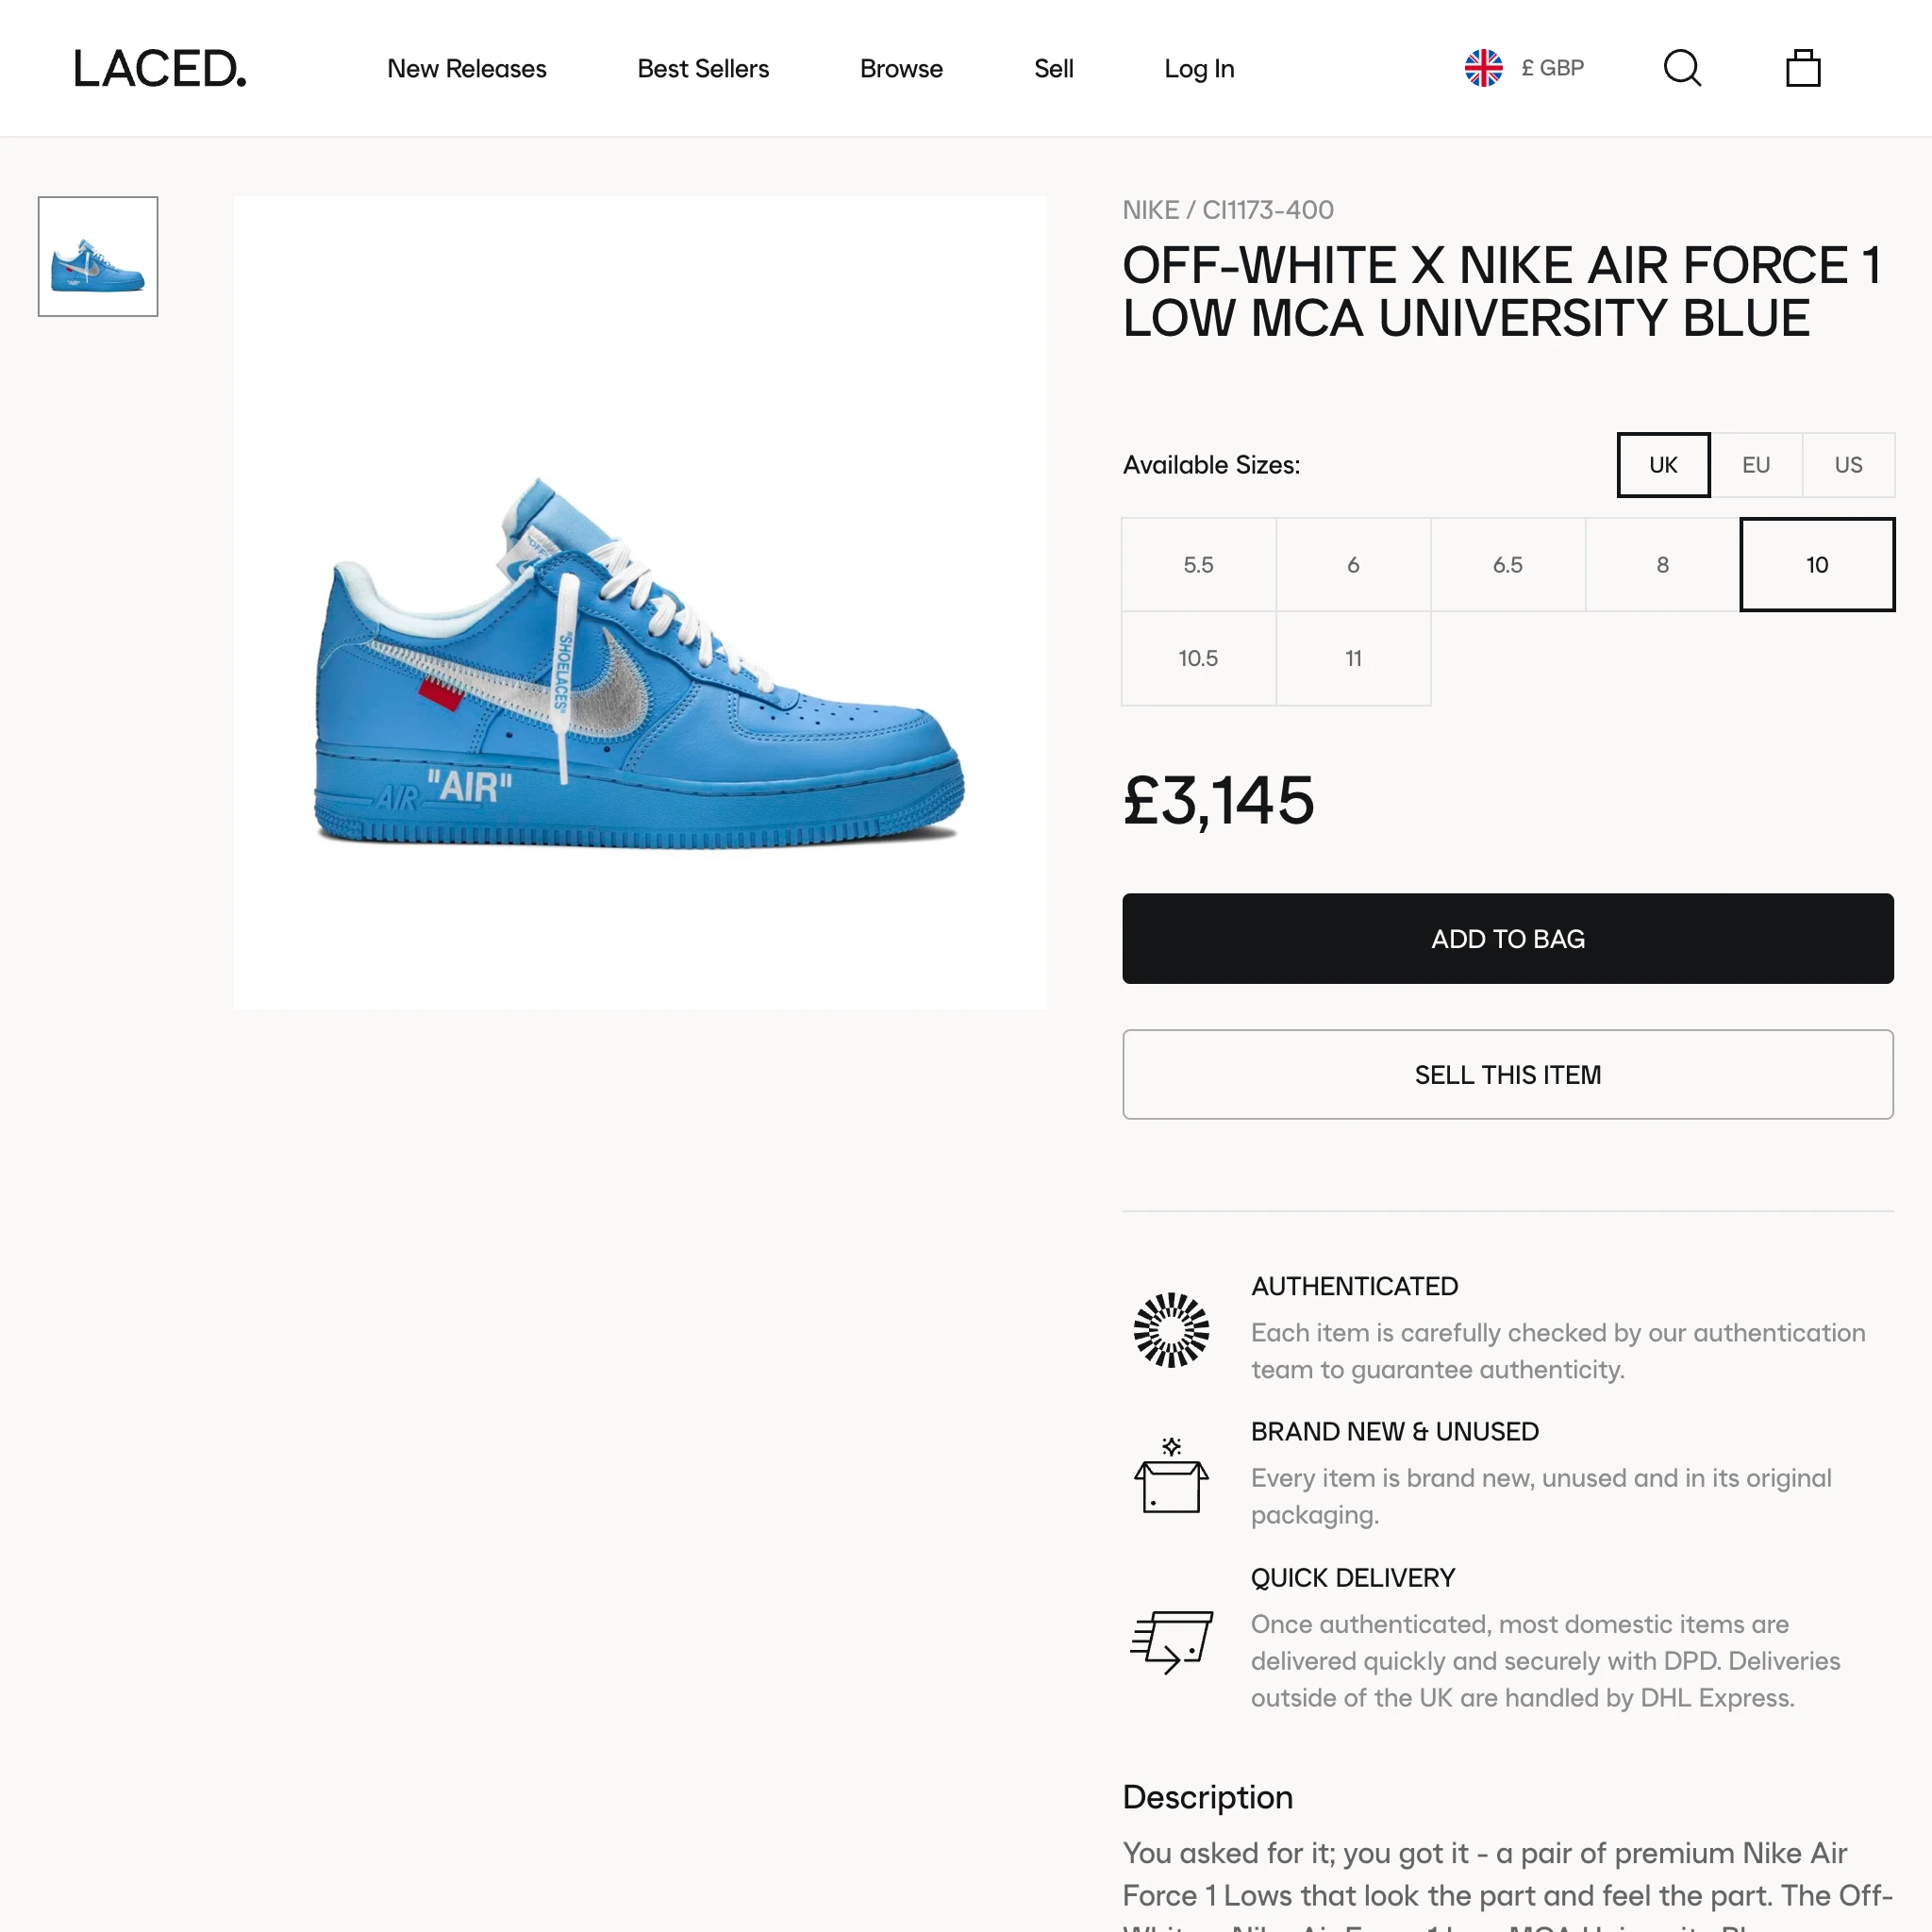 Laced product page